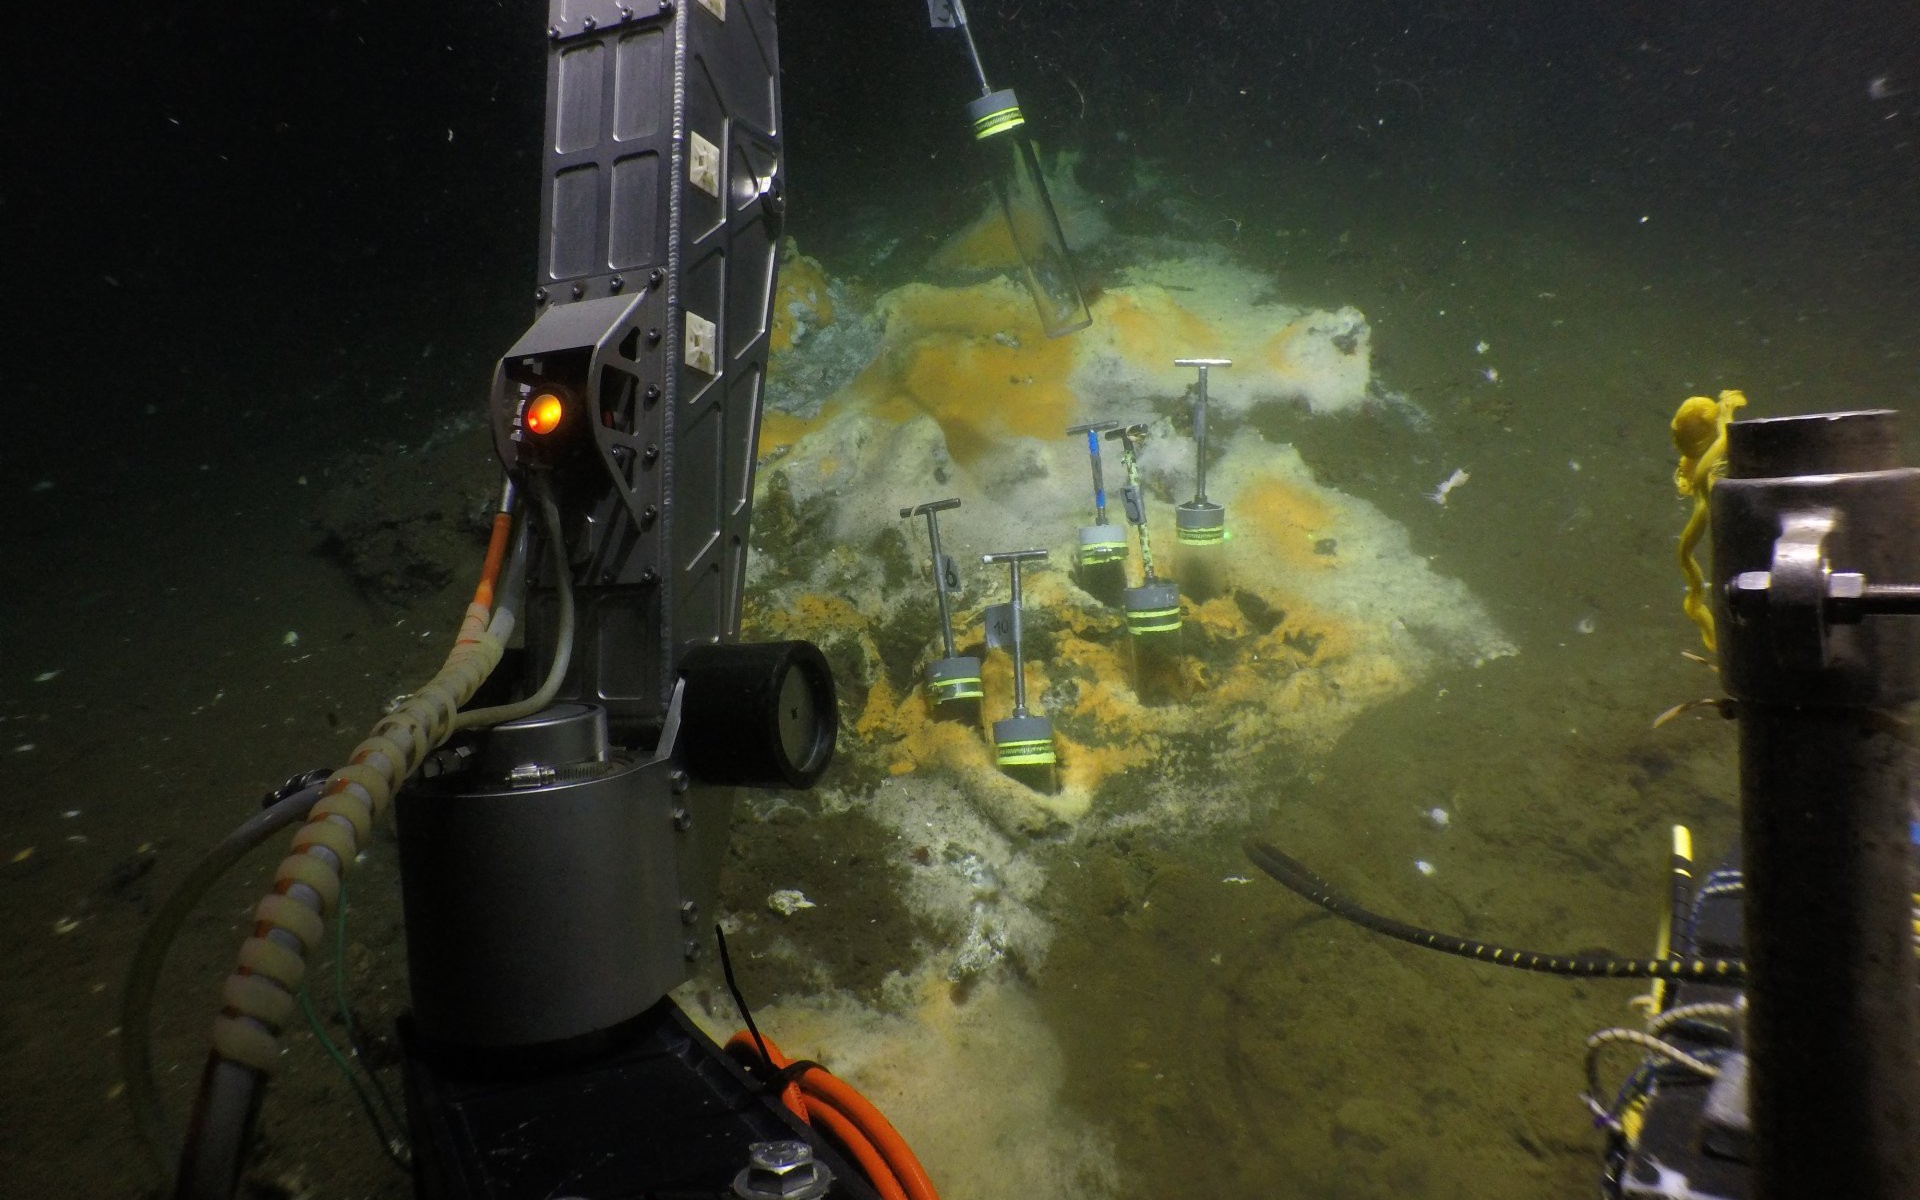 Diving in the Gulf of California: With the submersible ALVIN, the researchers from Bremen were able to reach the seafloor. There they used ALVIN's grab arm to collect sediment cores from the seabed. White-orange coloured microbial mats made of sulfur-oxidizing bacteria indicate hot vents, where particularly large amounts of methane and other energy-rich compounds are released. (© Woods Hole Oceanographic Institution)